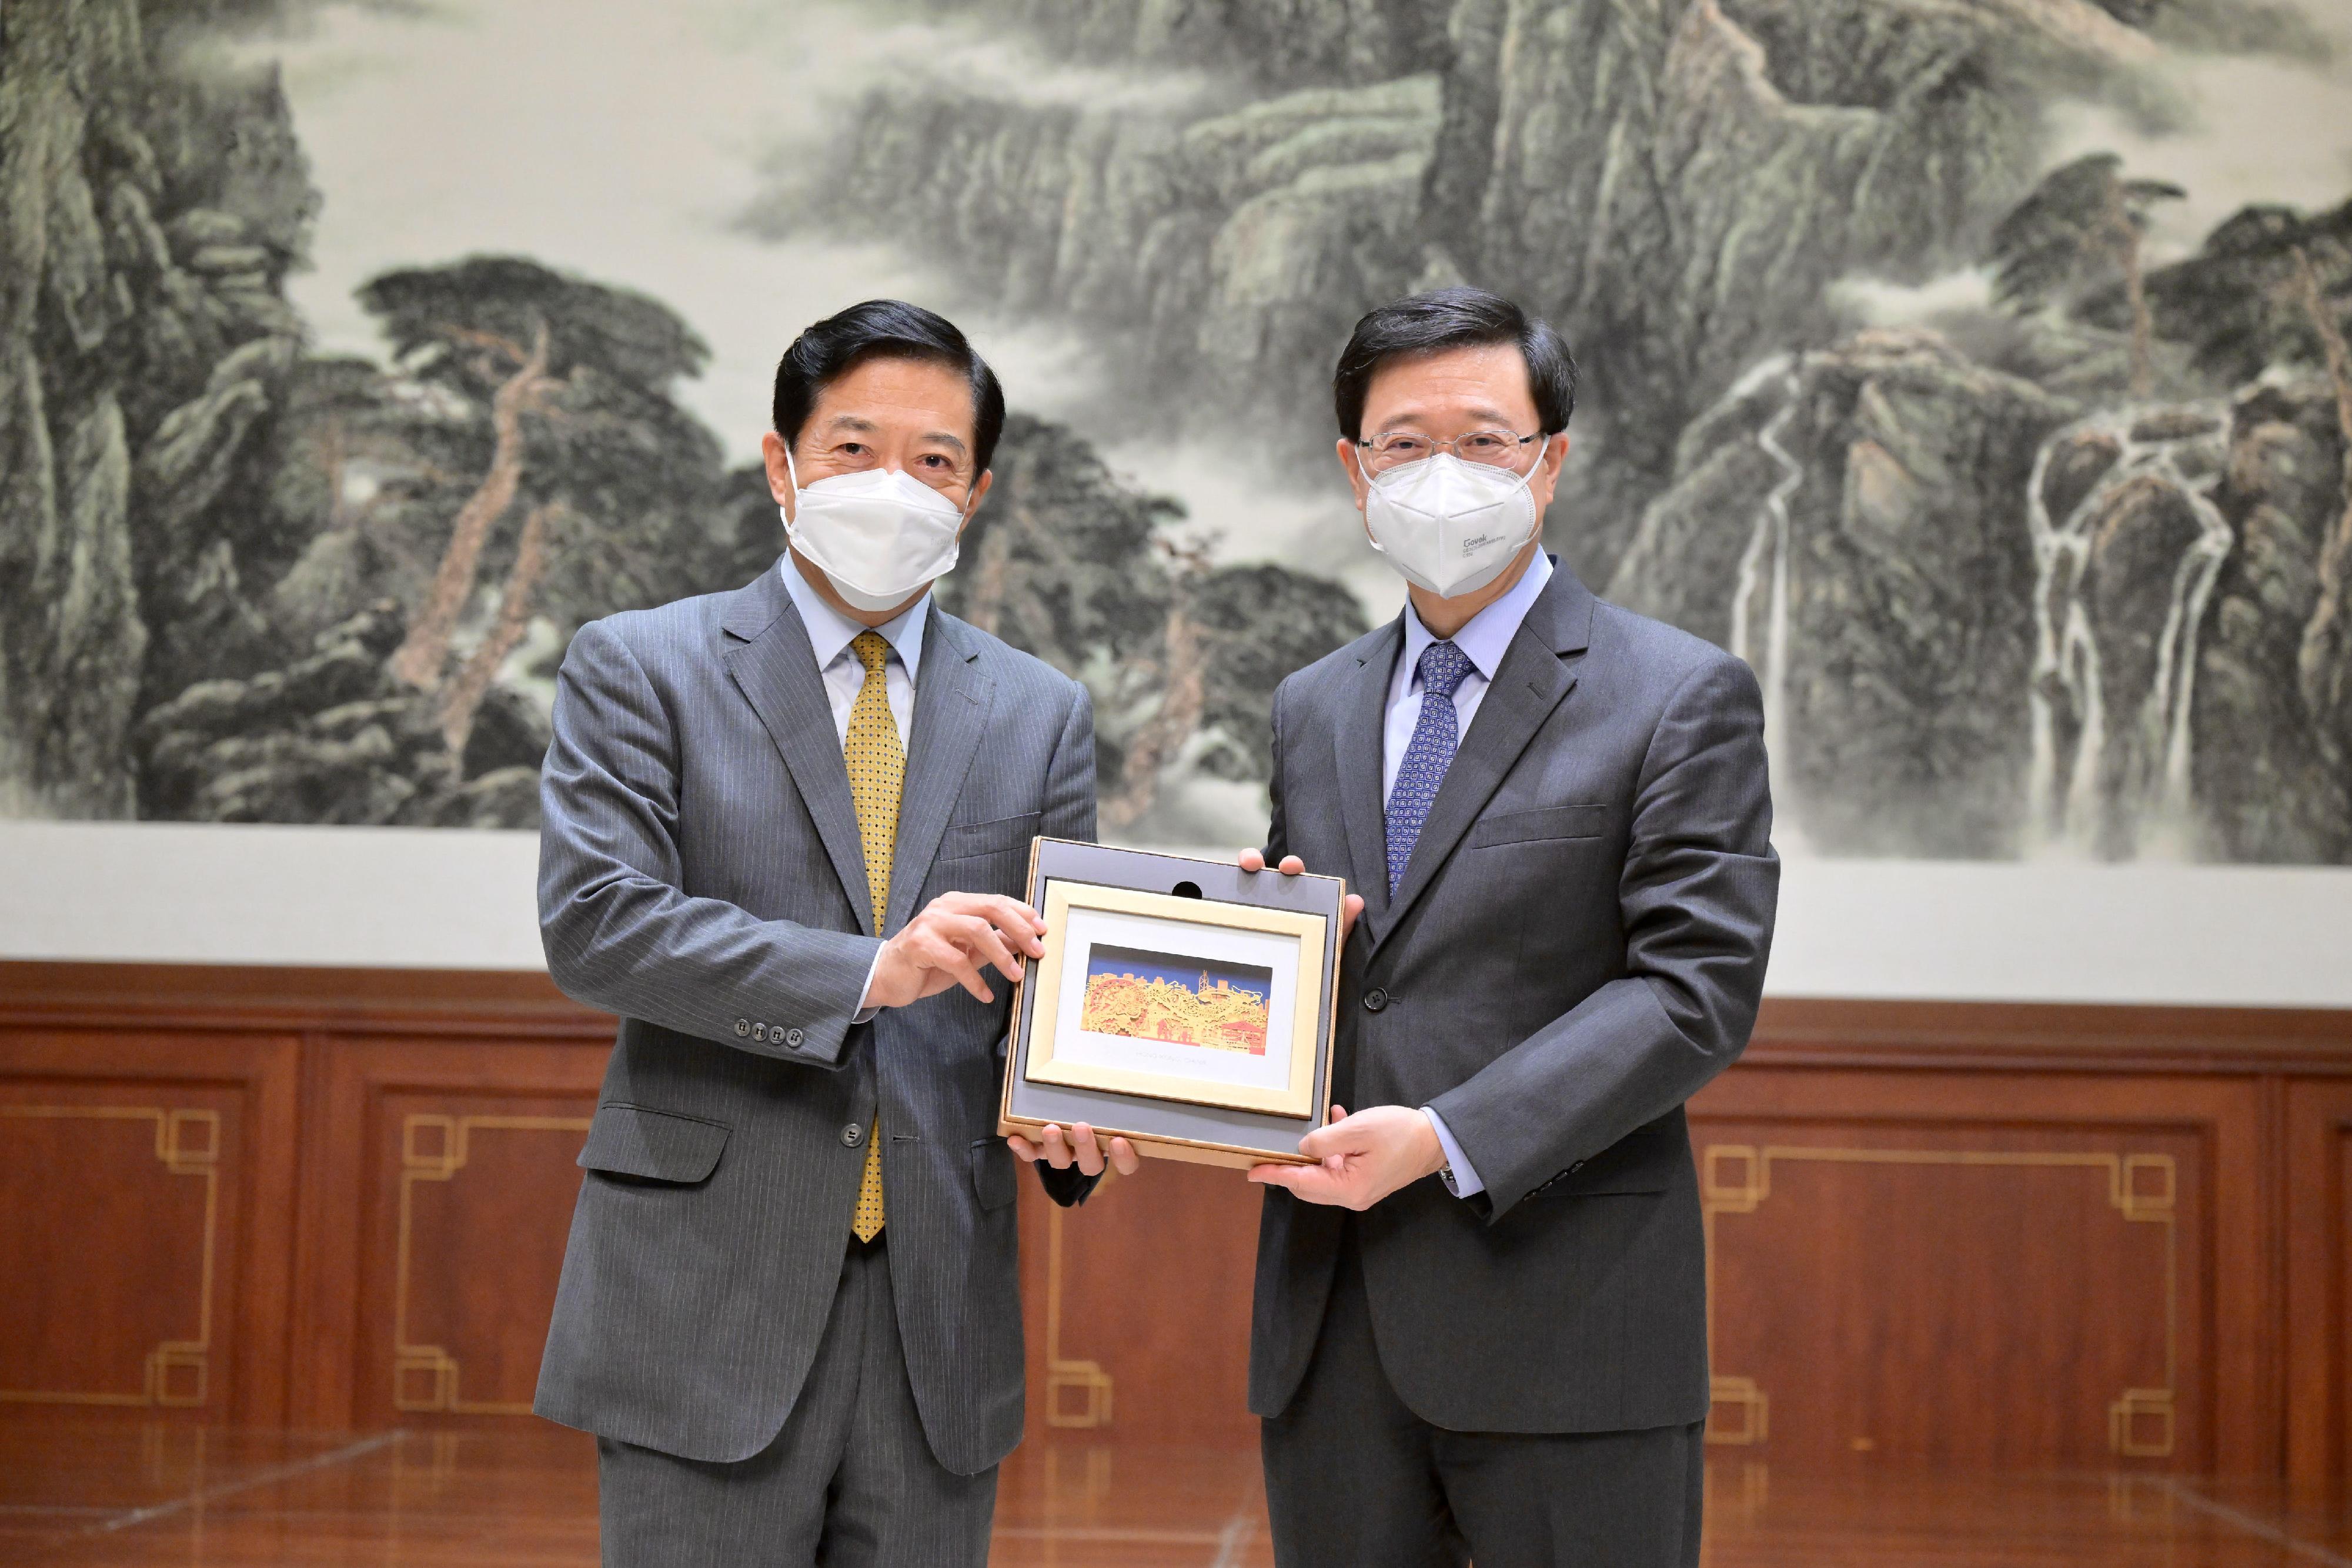 The Chief Executive, Mr John Lee (right), meets with the Ambassador Extraordinary and Plenipotentiary of the People's Republic of China to the Kingdom of Thailand, Mr Han Zhiqiang (left), in Bangkok, Thailand, today (November 20). Photo shows Mr Lee presenting a souvenir to Mr Han.
